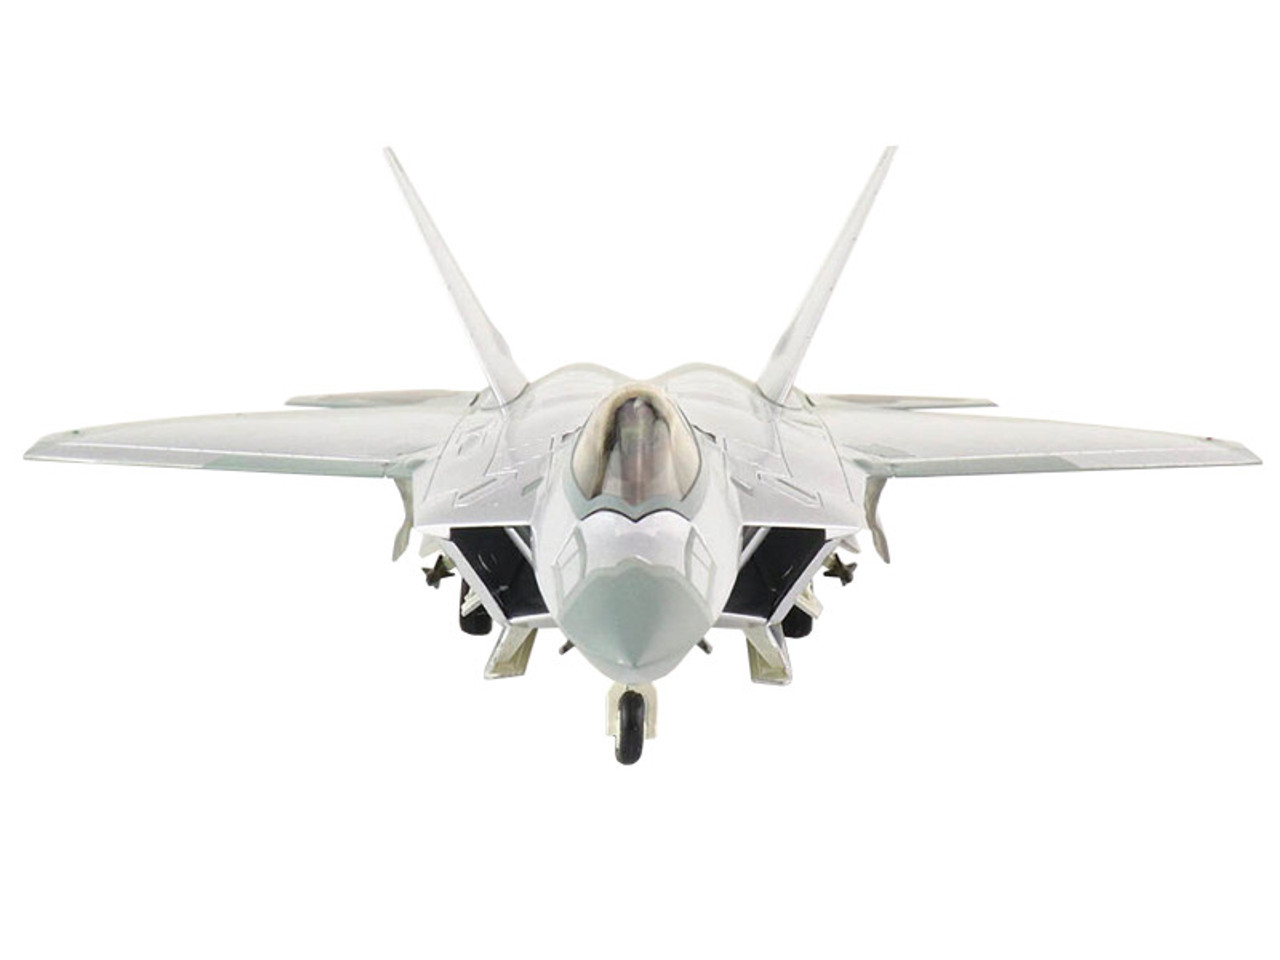 Lockheed Martin F-22A Raptor Fighter Aircraft "Mirror Coating" "422nd TES" (November 2021) "Air Power Series" 1/72 Diecast Model by Hobby Master